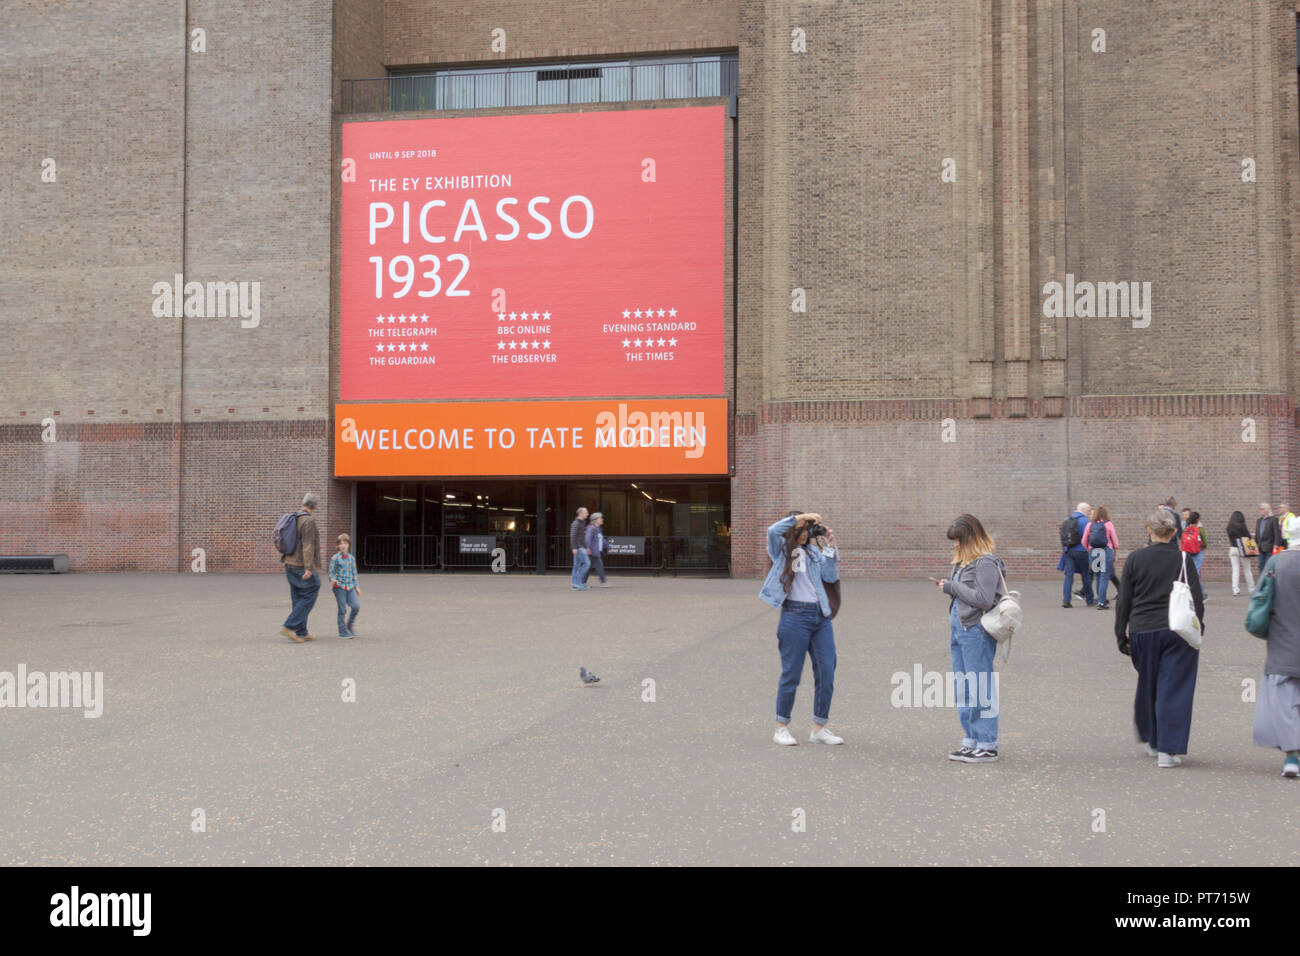 Tate Modern, Bankside, London, UK. 08th September 2018. UK. Tourists outside the Tate Modern gallery, situated by the River Thames. Stock Photo